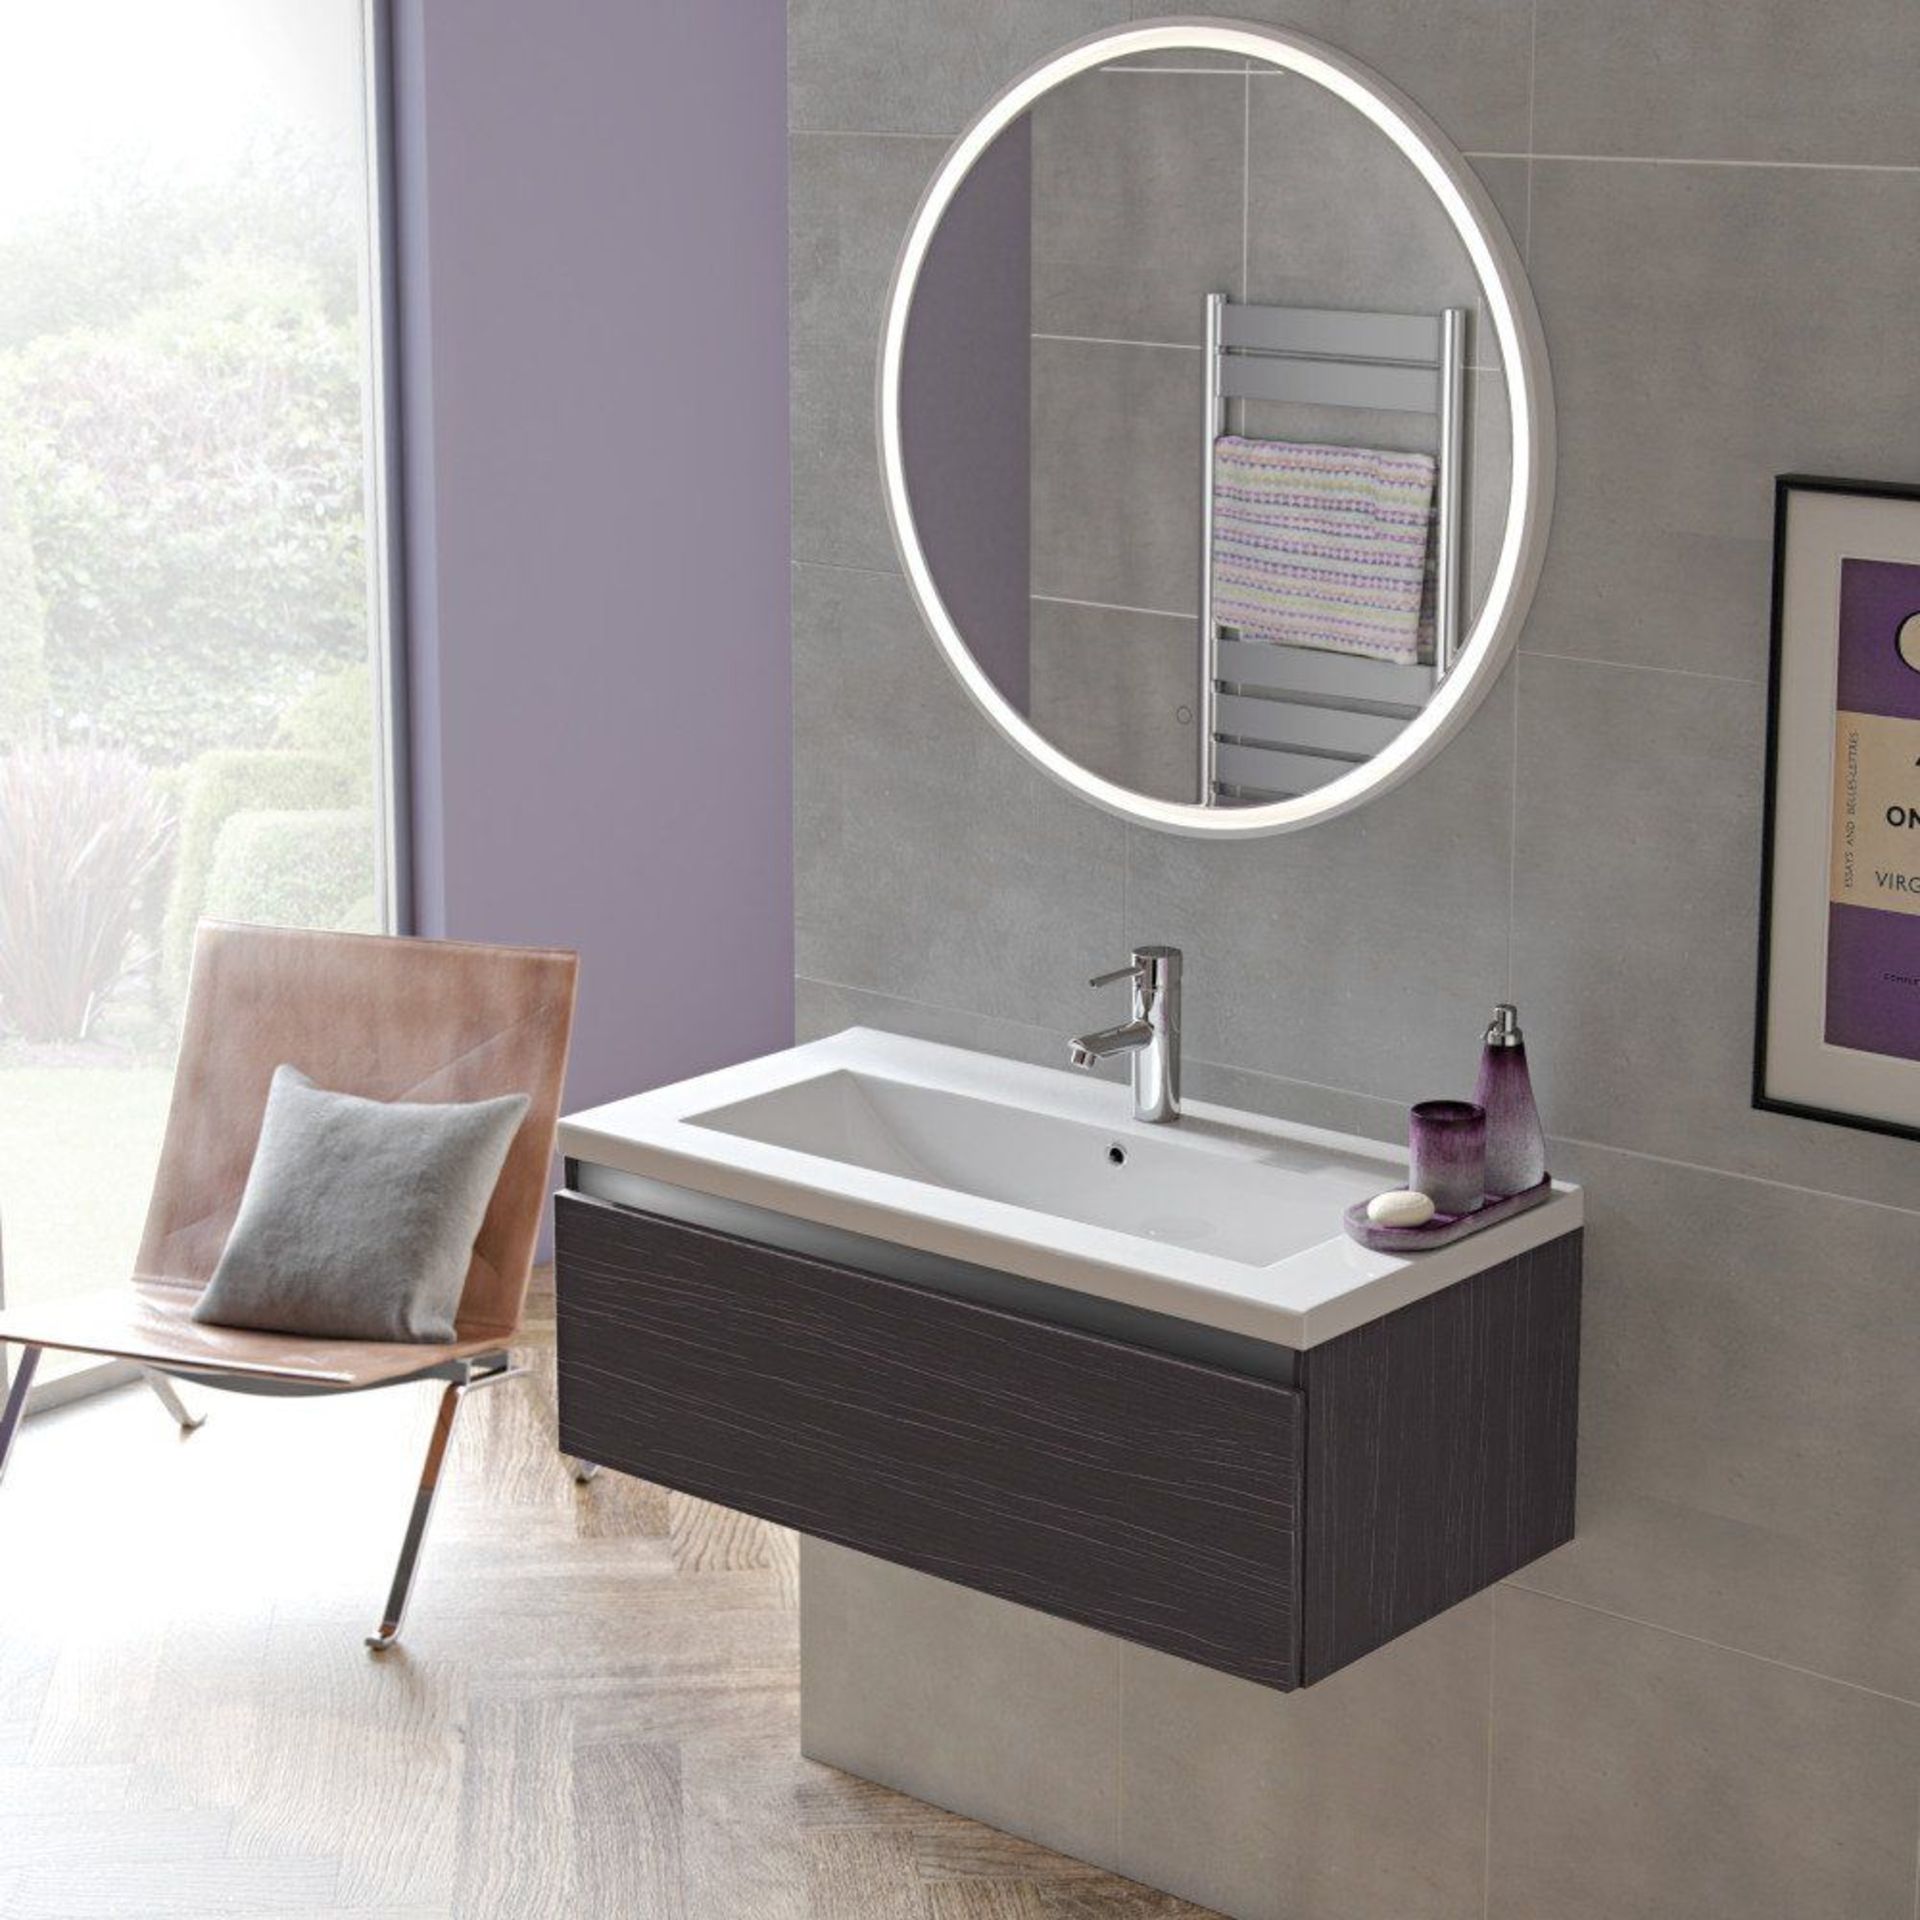 (SP33) New Carino 800mm 1 Drawer Wall Hung Vanity Unit - Graphitewood. RRP £510.00. The integrated